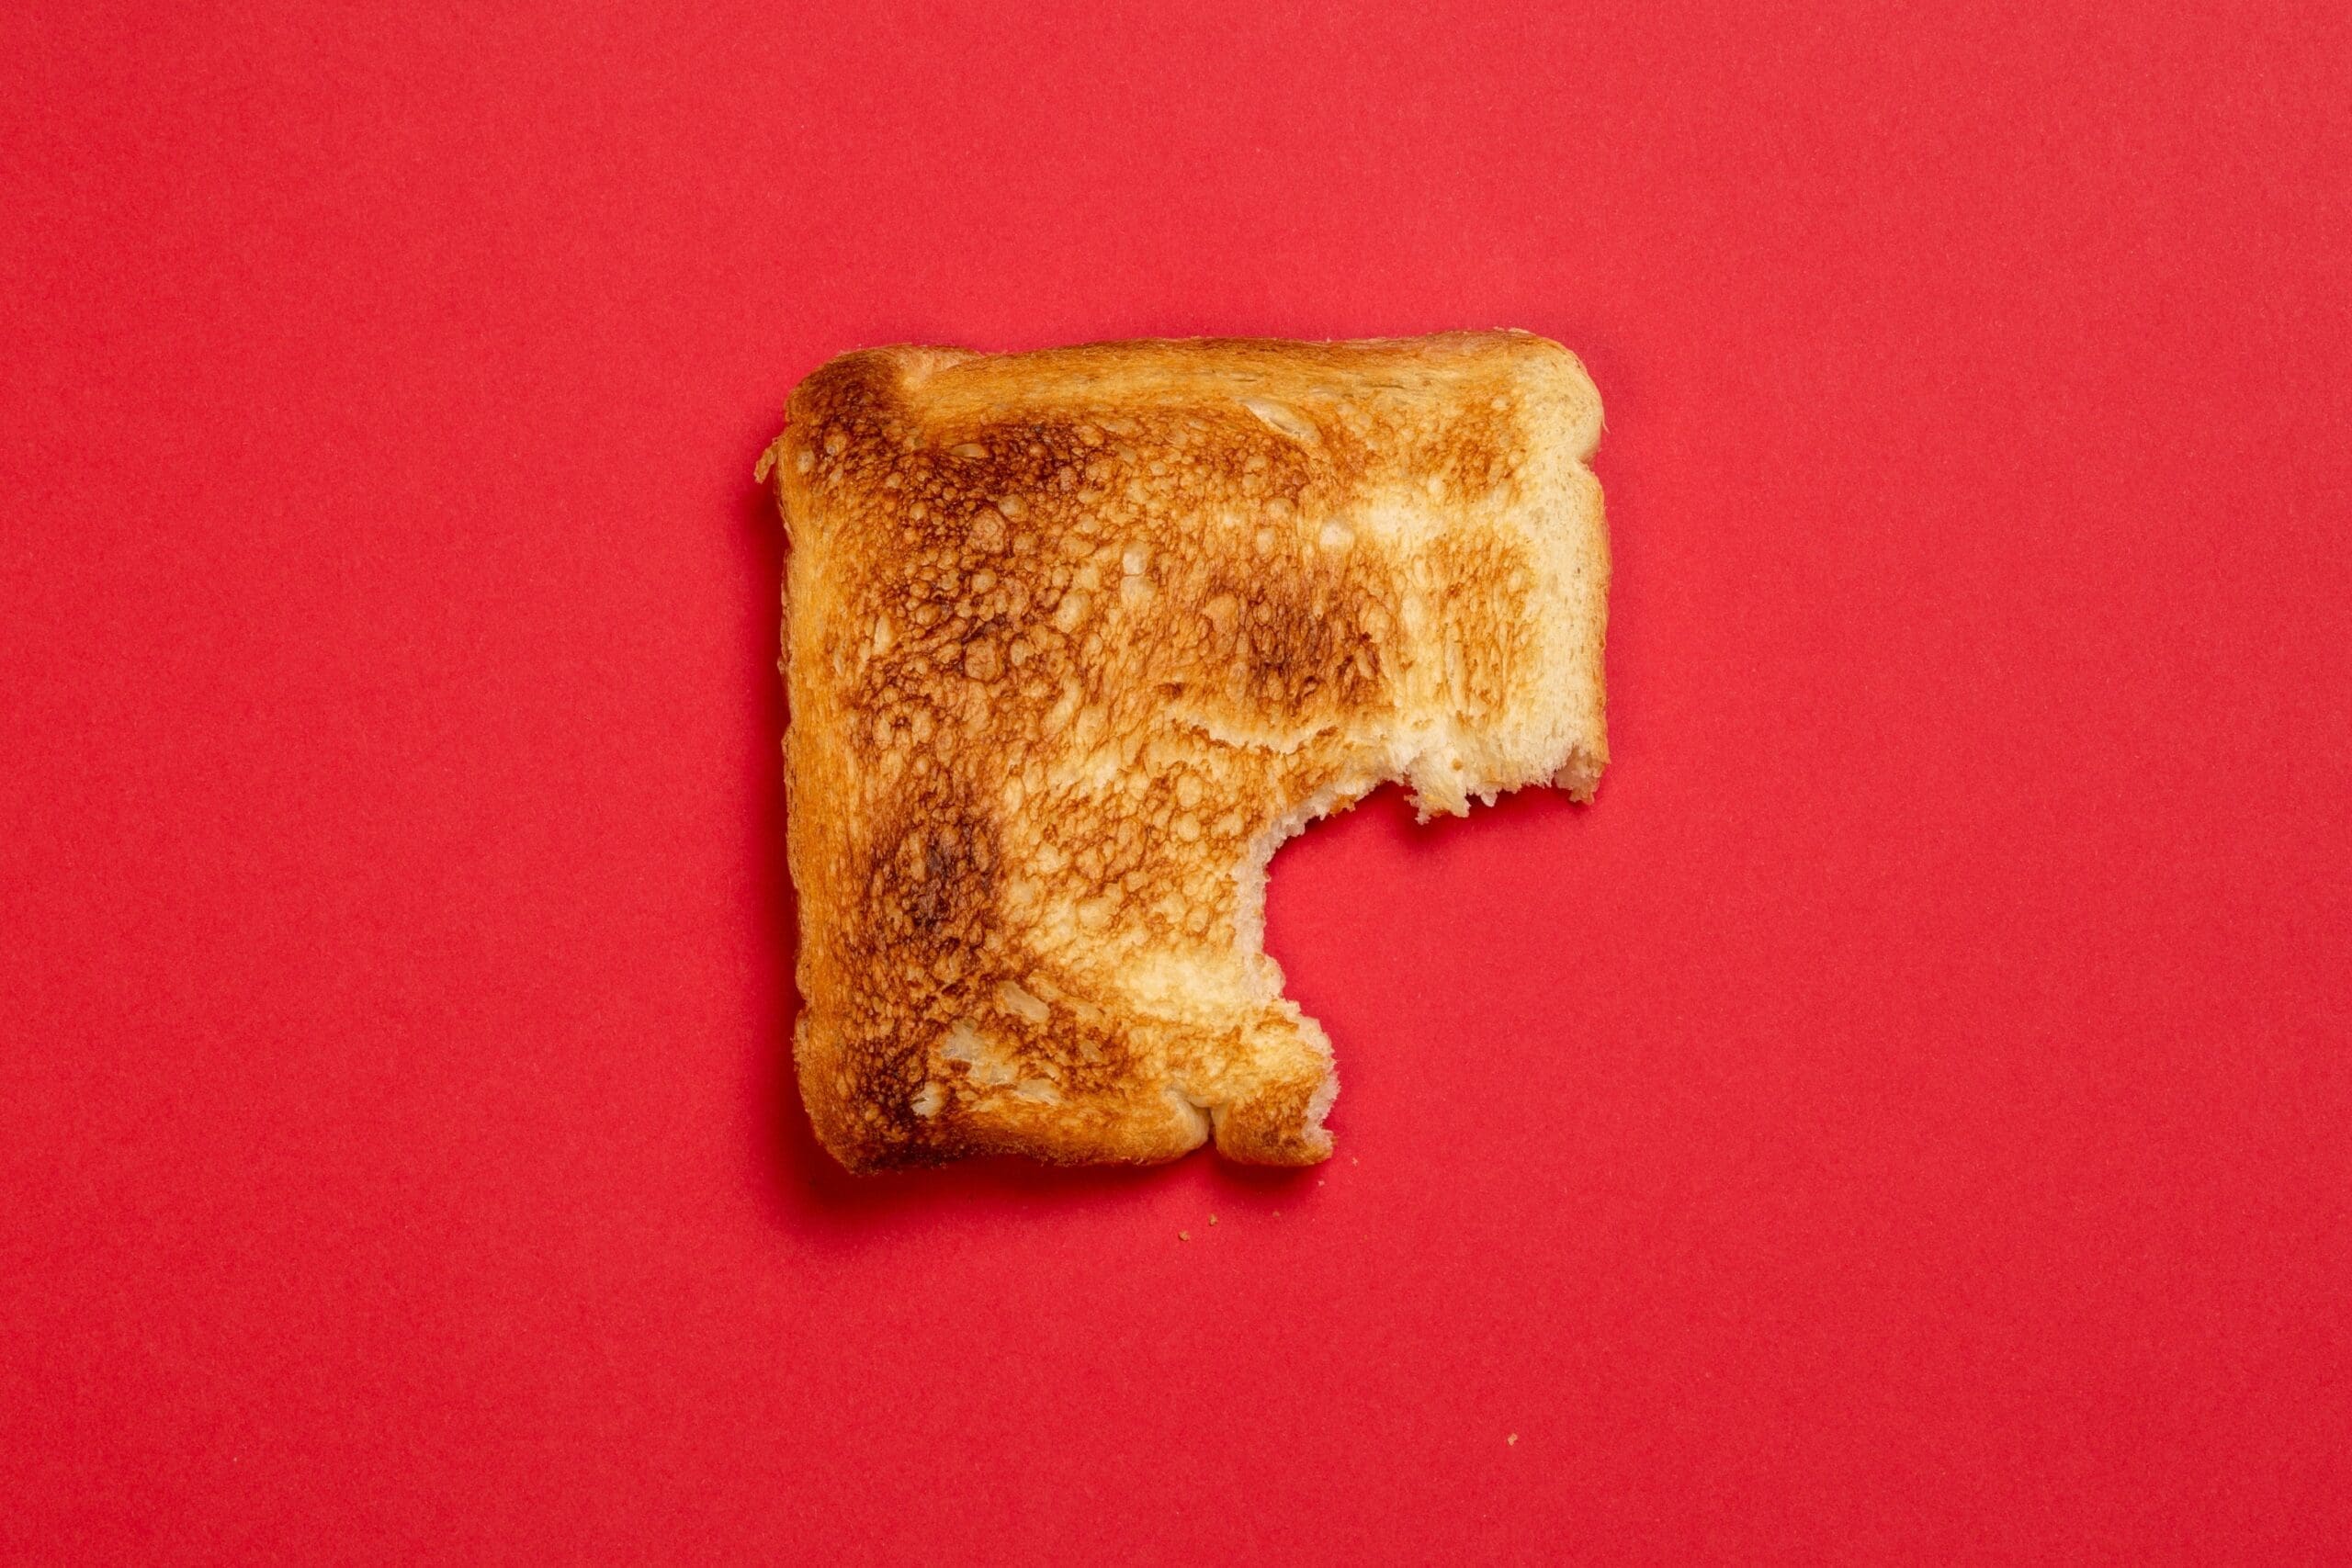 Can your toast give you cancer?